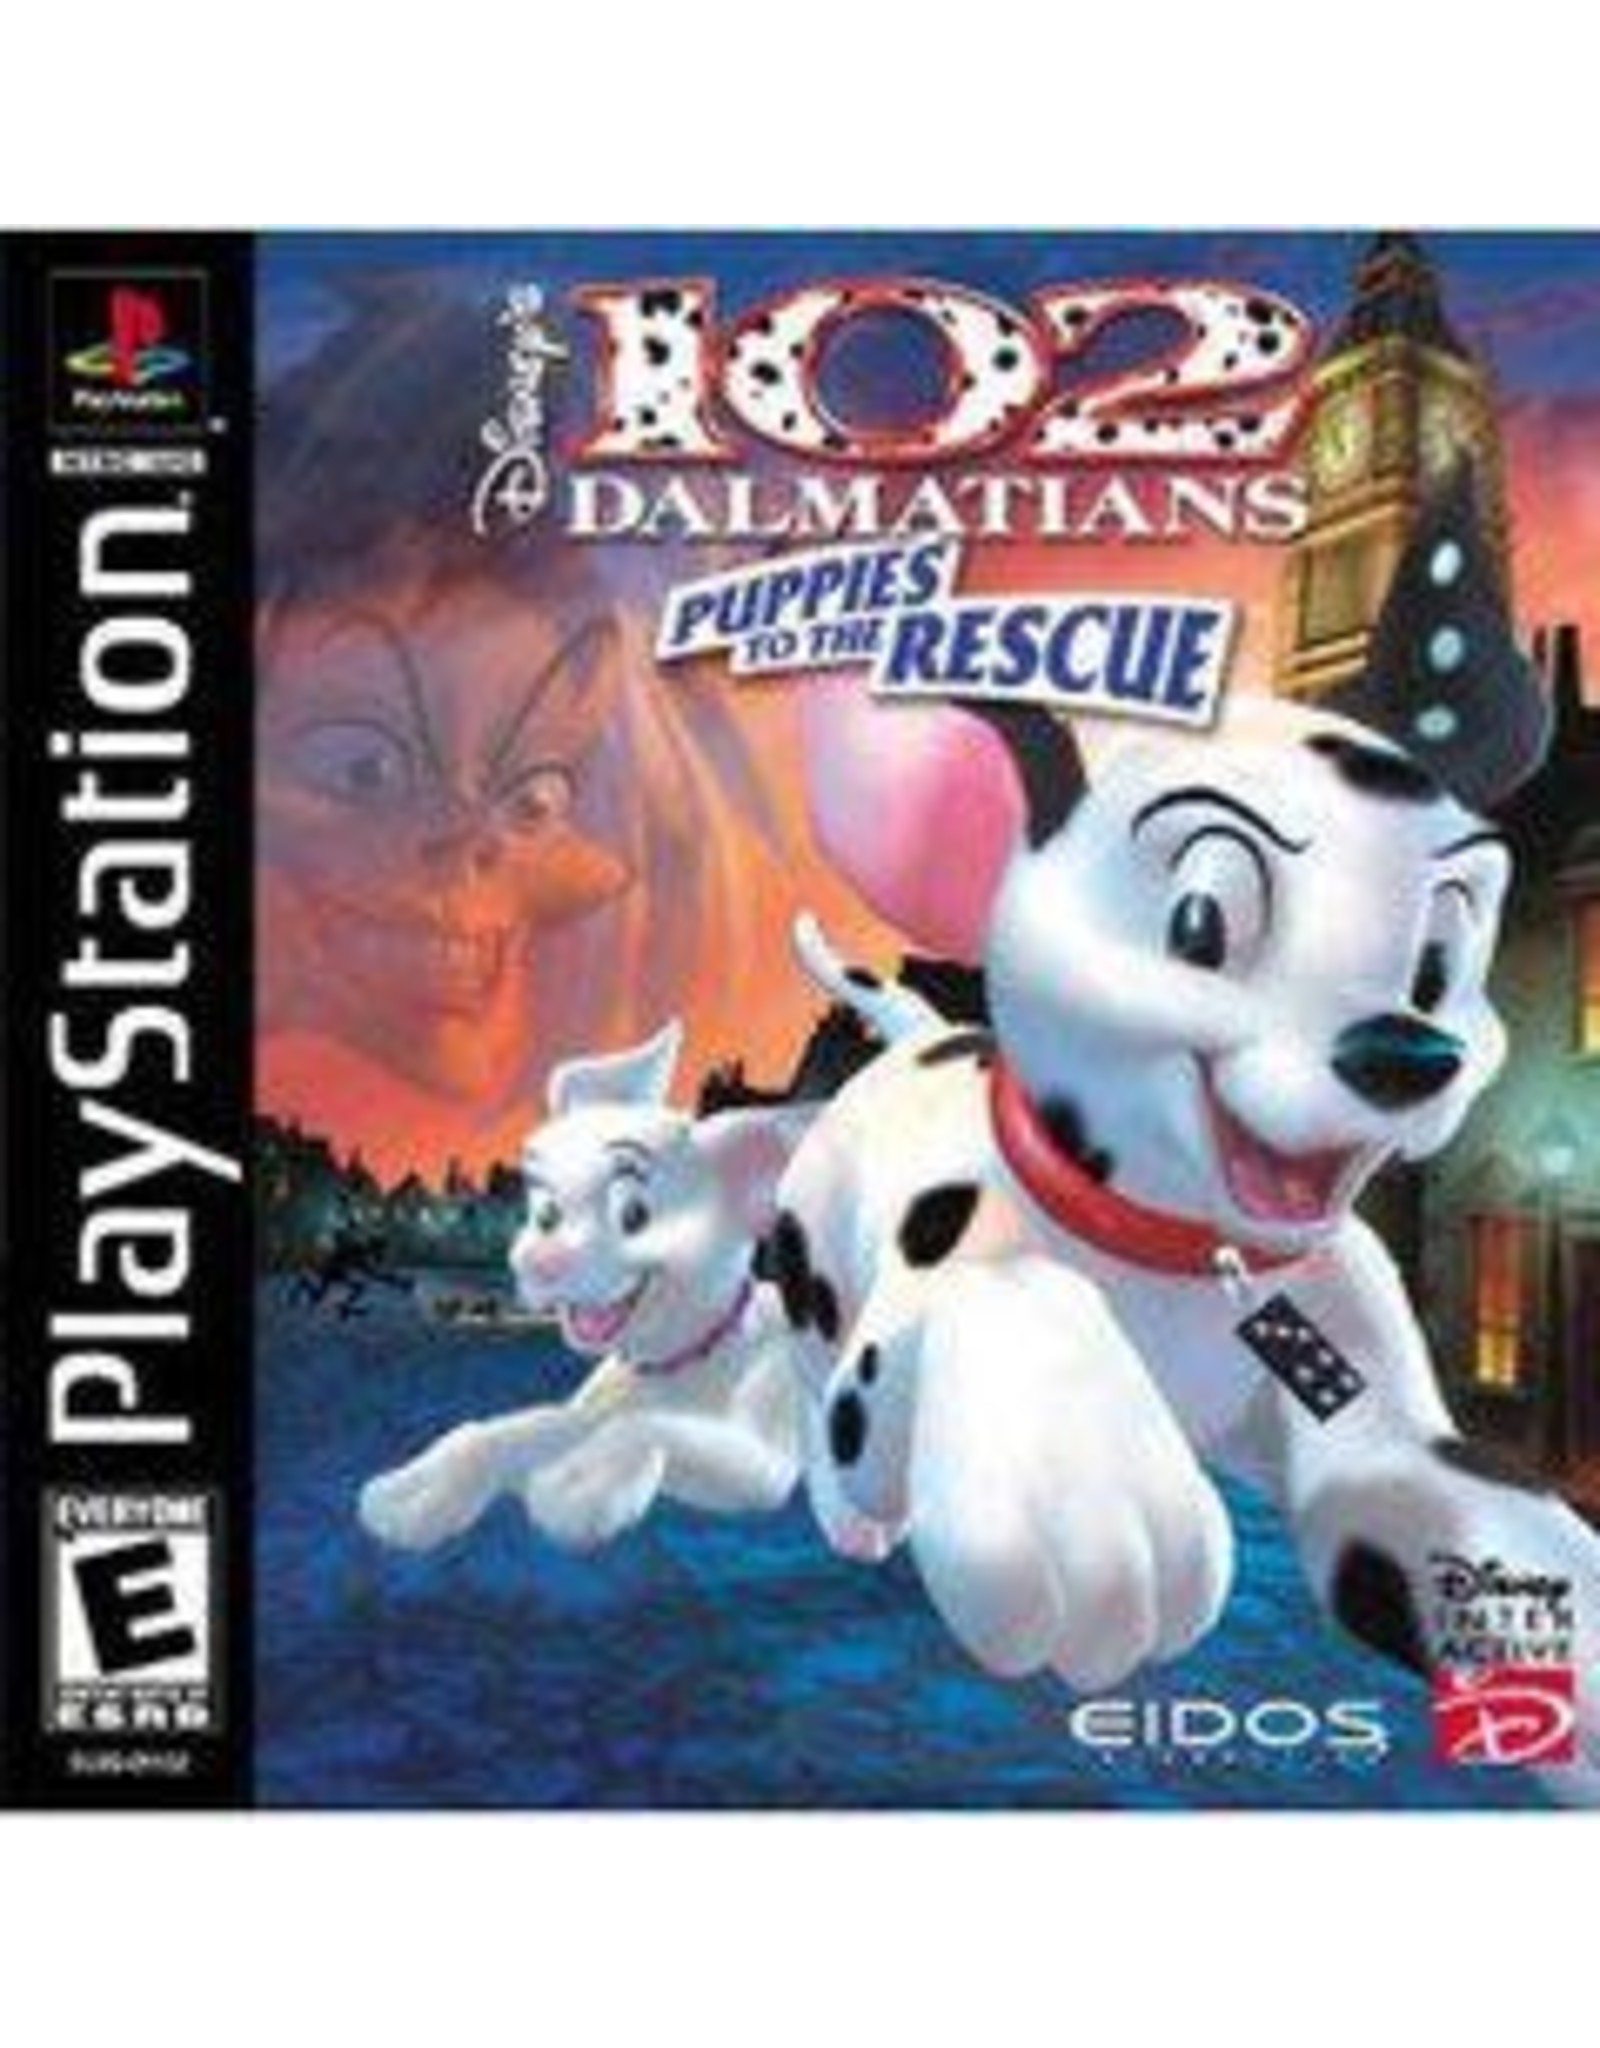 Playstation 102 Dalmatians Puppies to the Rescue (Brand New)